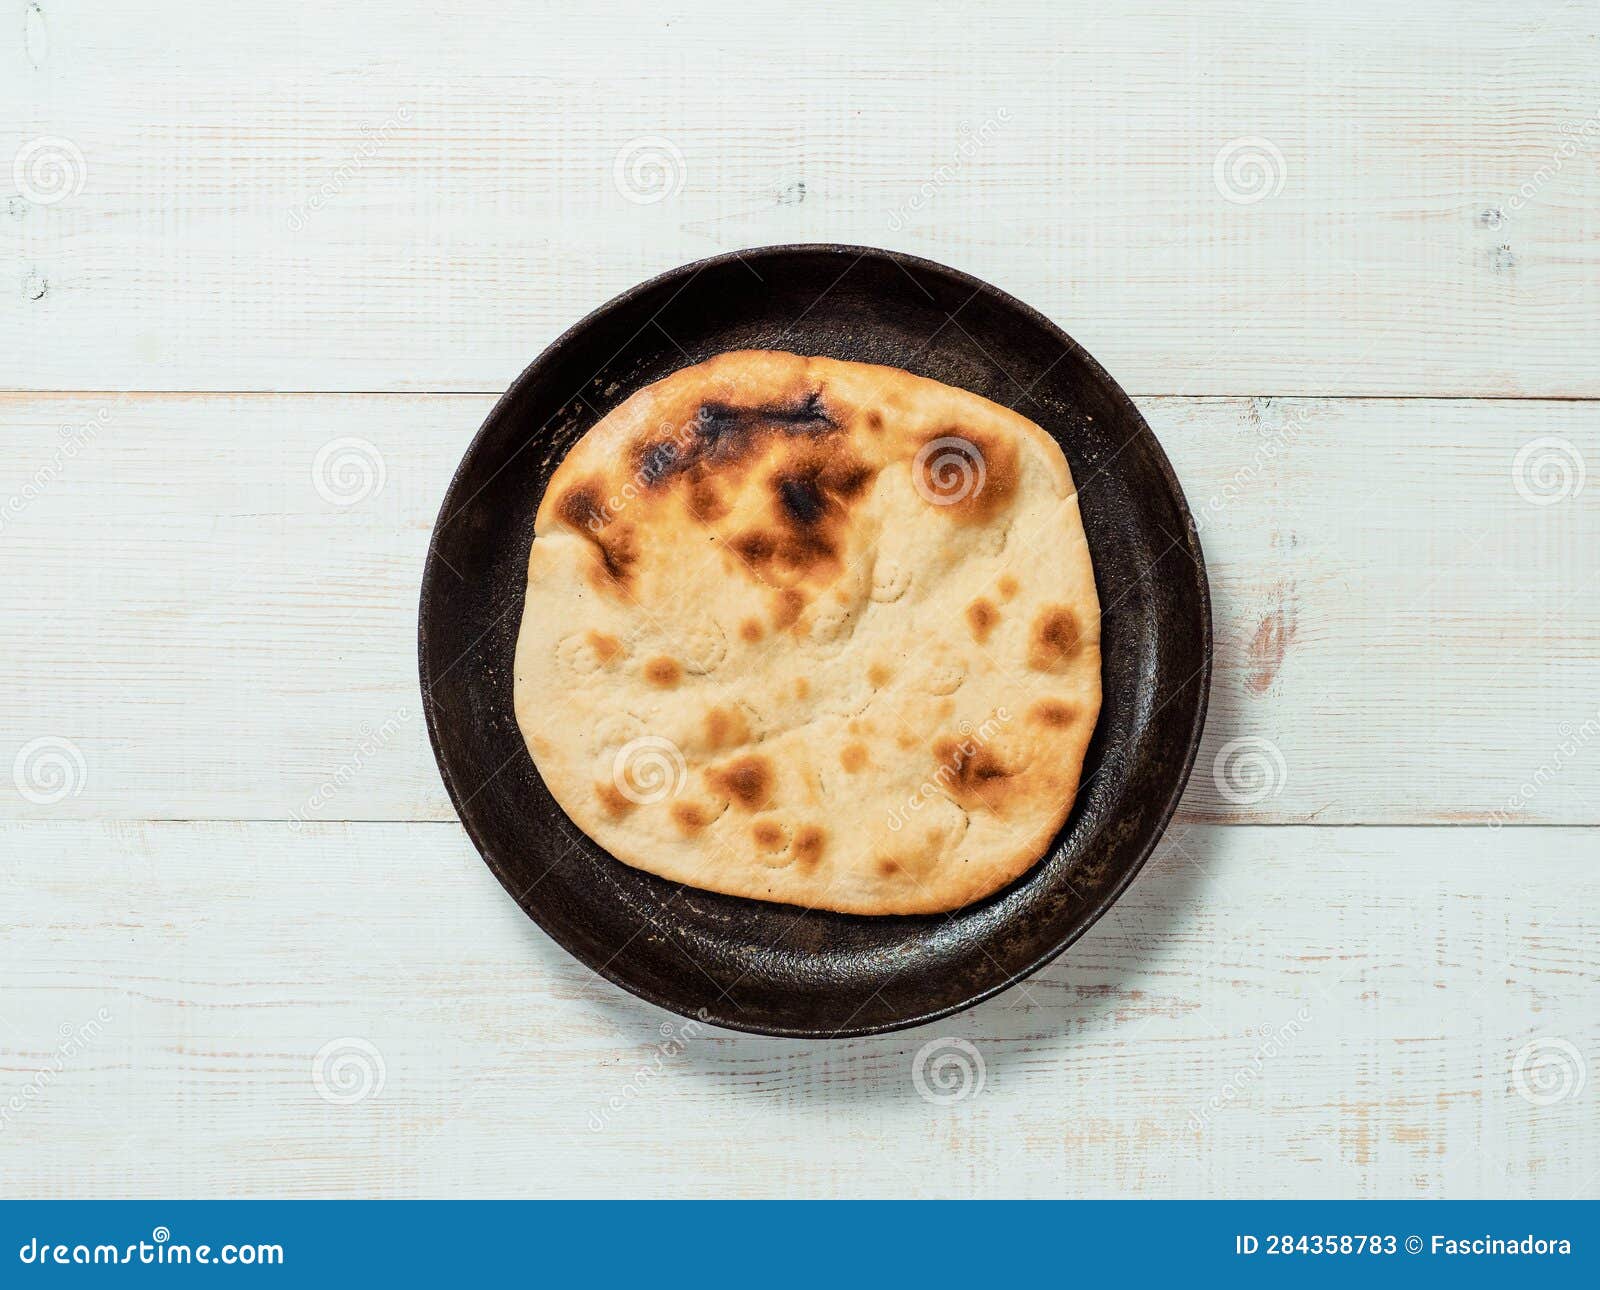 naan flatbread on white wood, copy space, top view